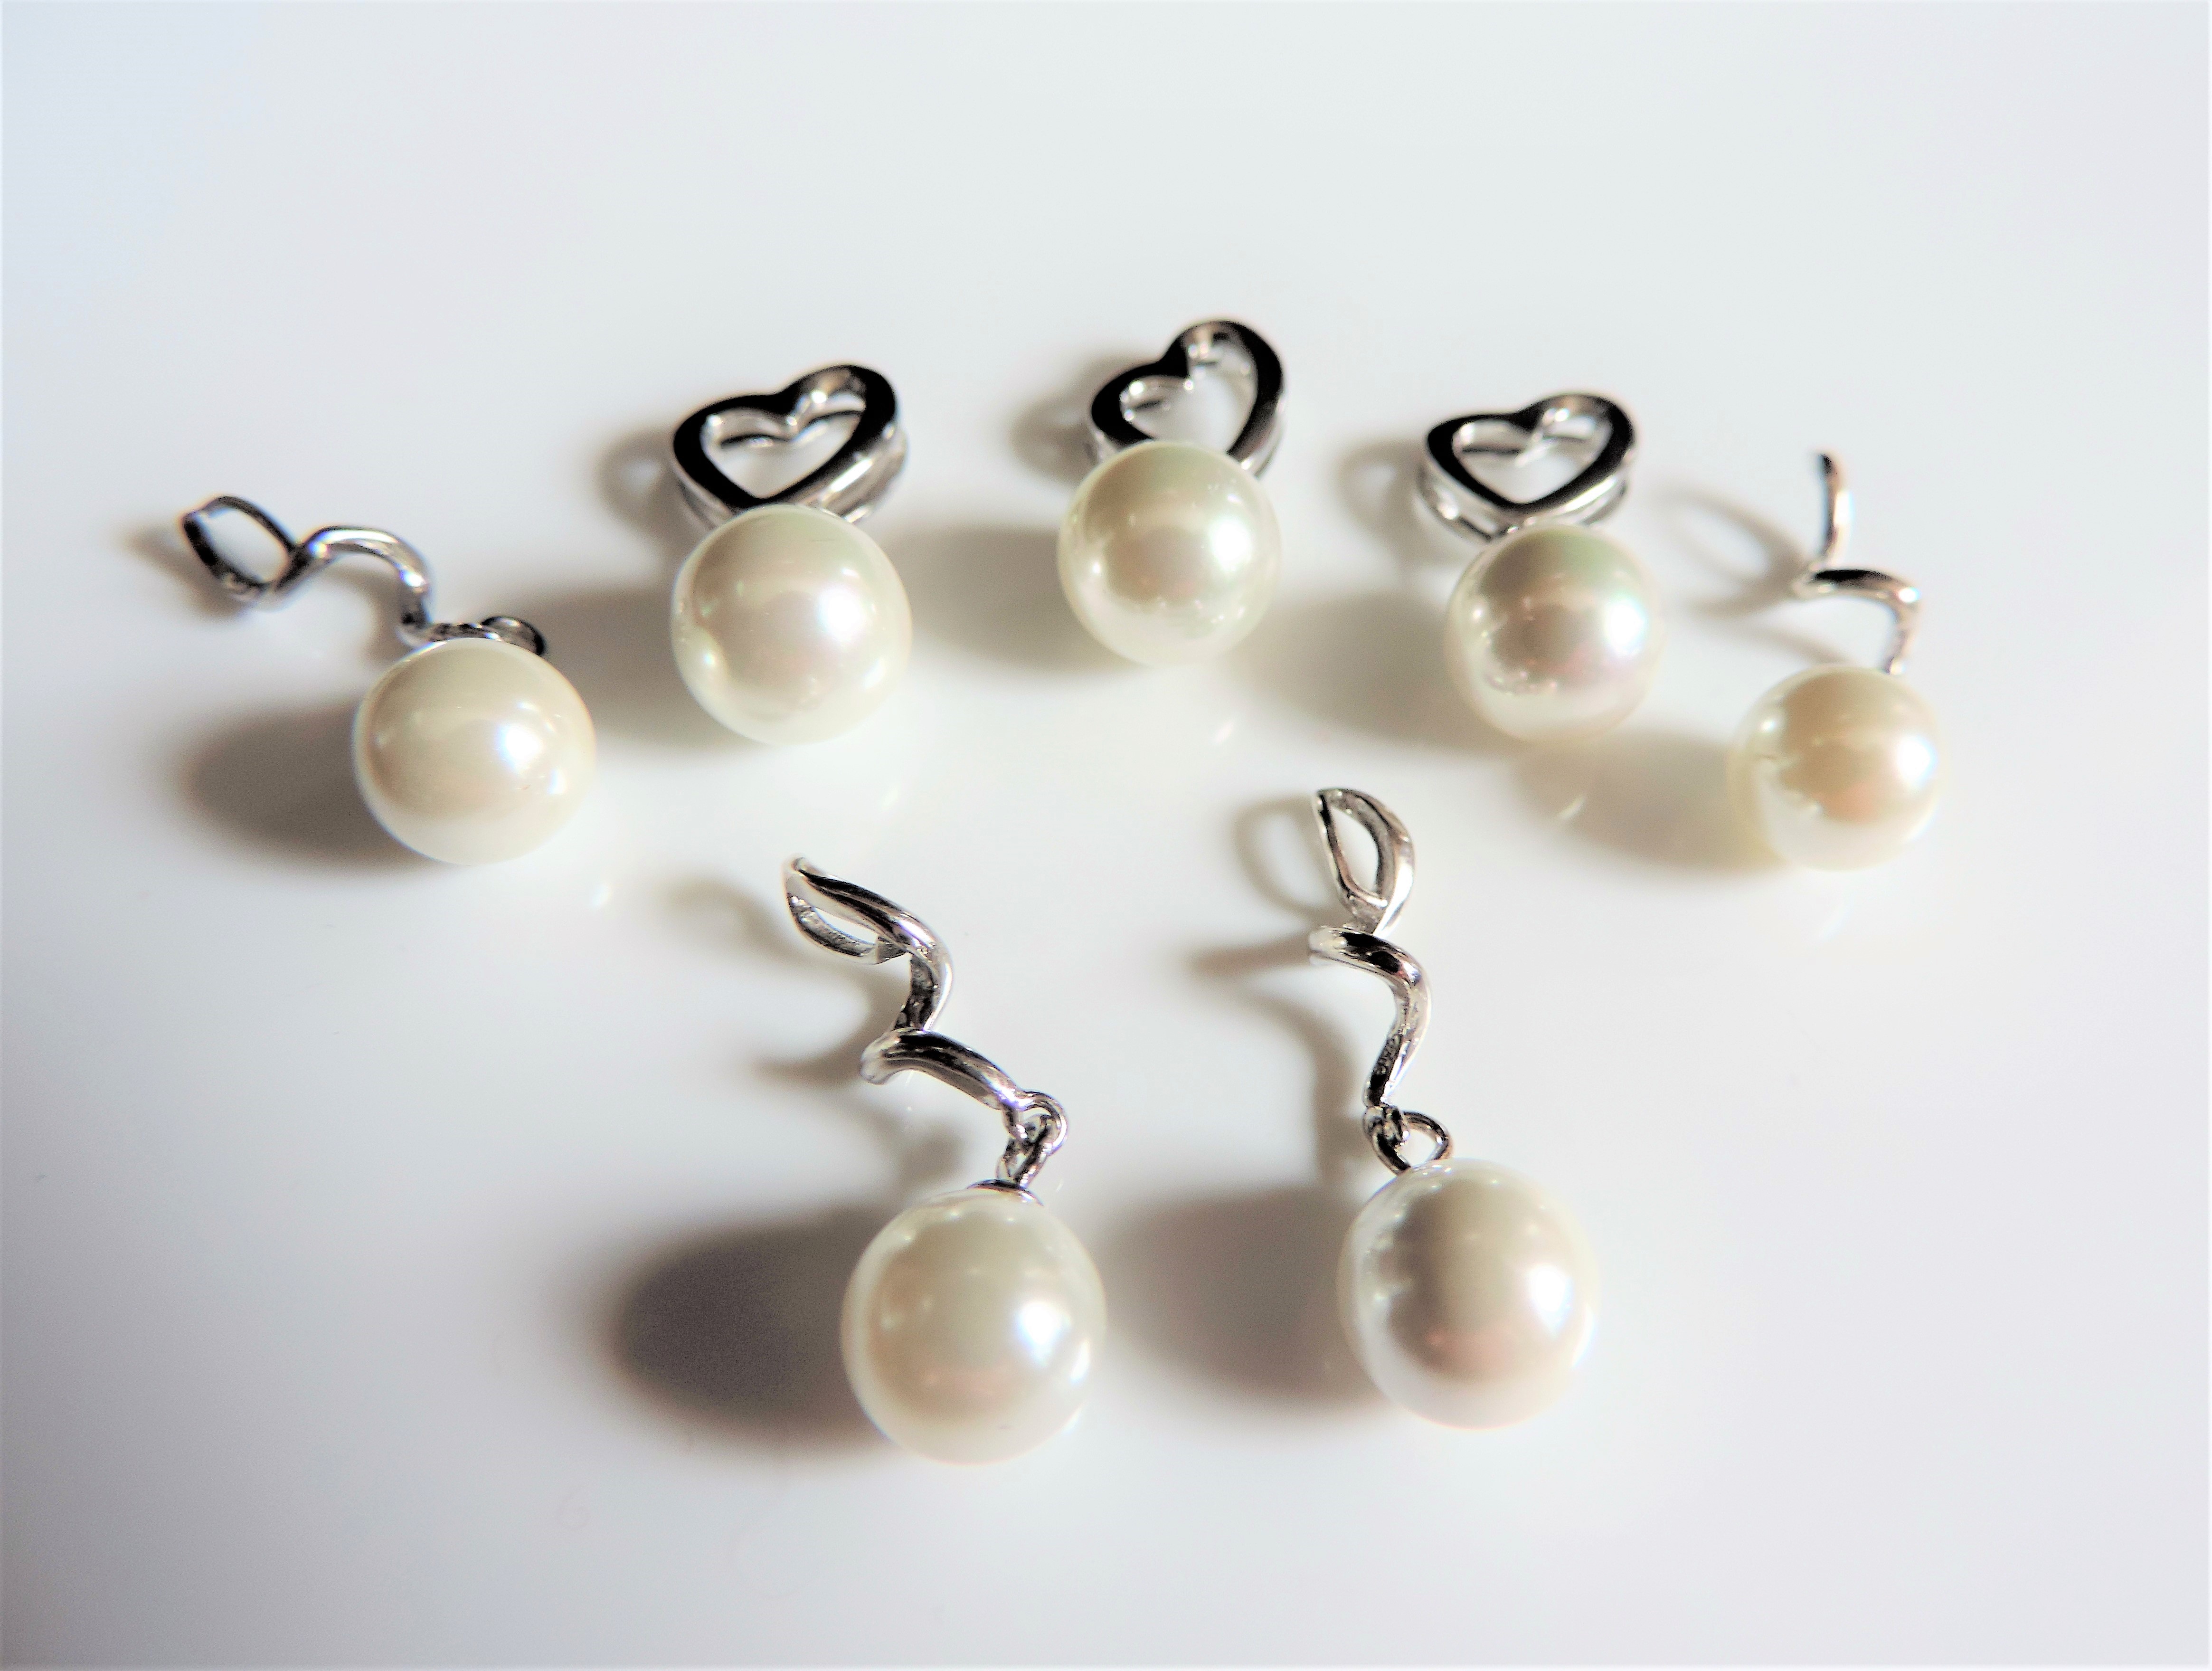 7 x Sterling Silver Pearl Pendants - Image 3 of 3